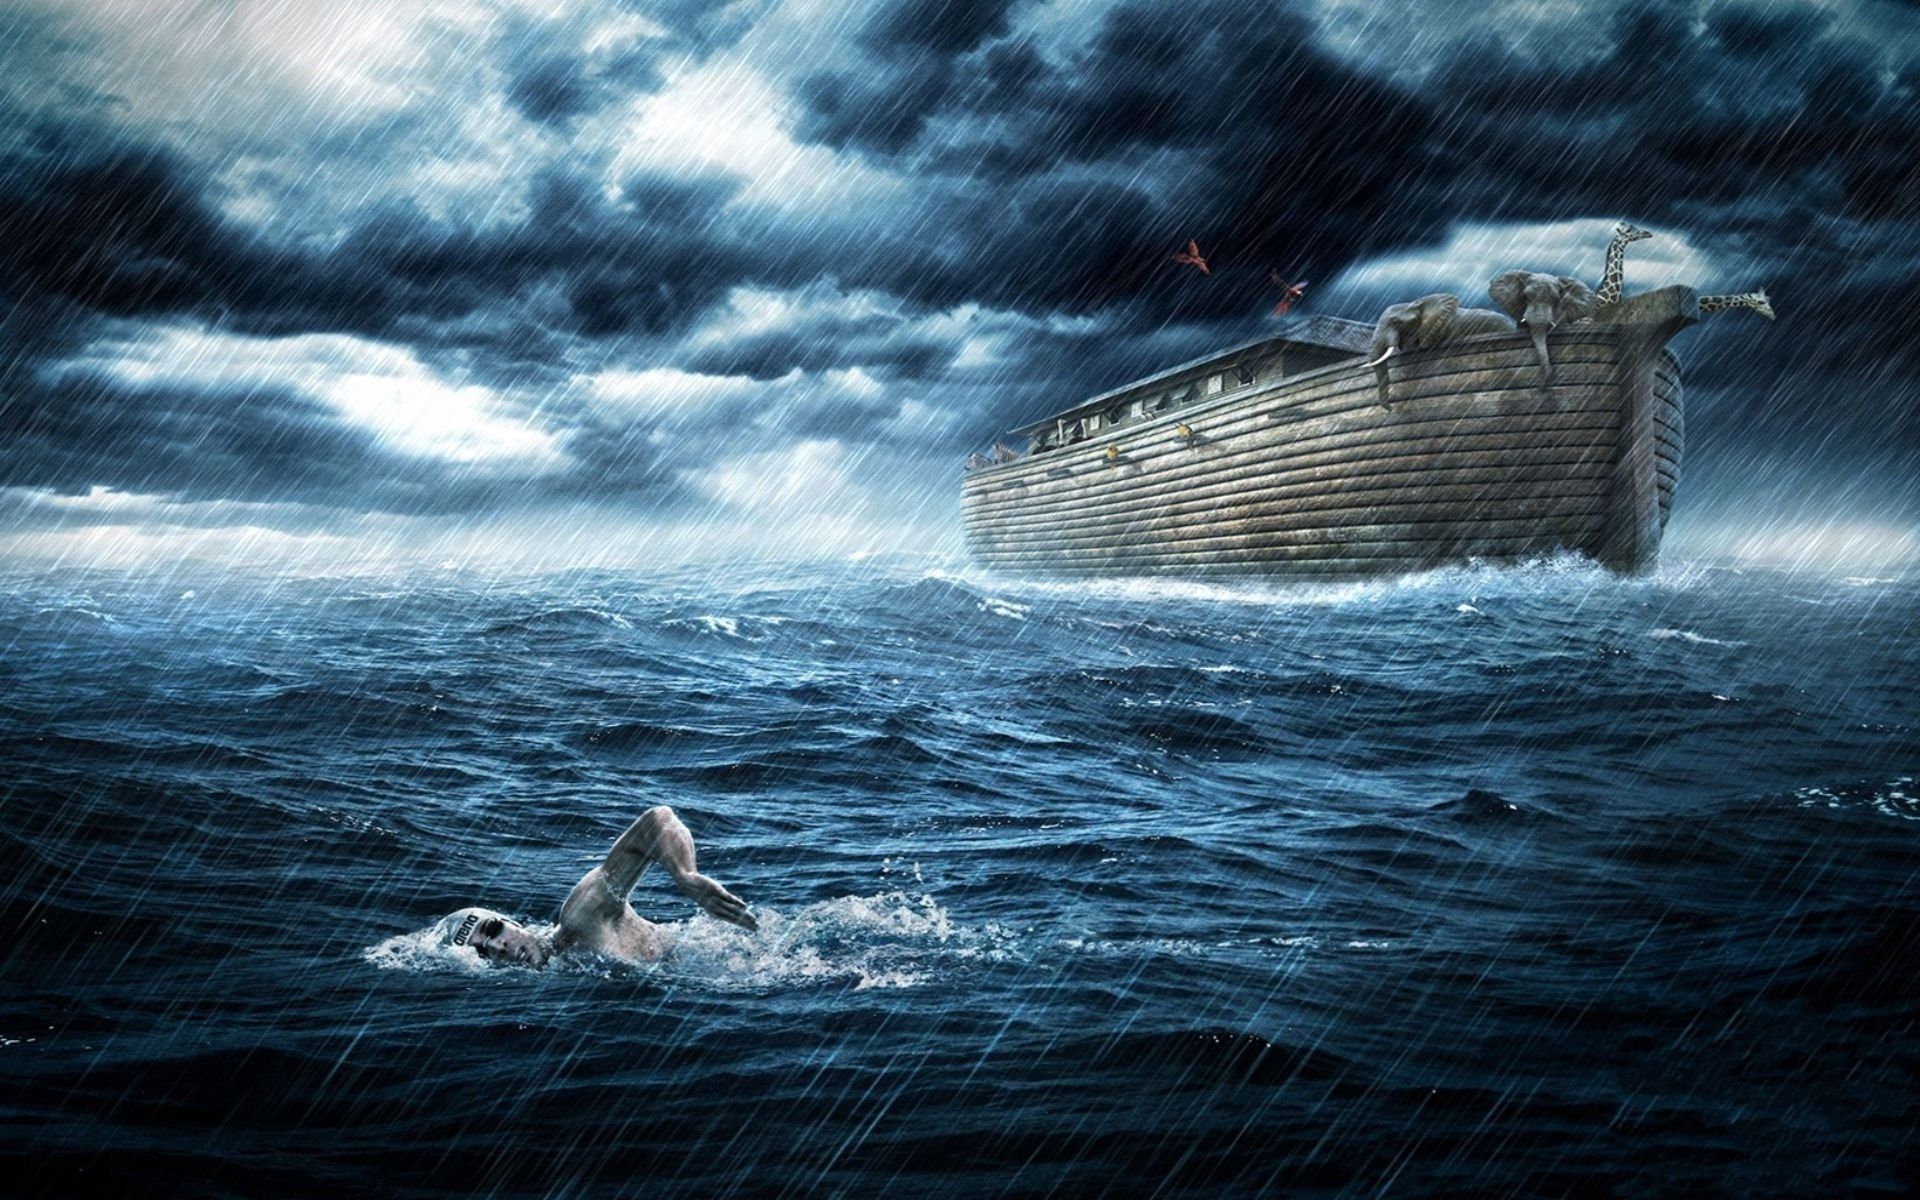 Man swims in the ocean at Noah's ark wallpaper and image, picture, photo